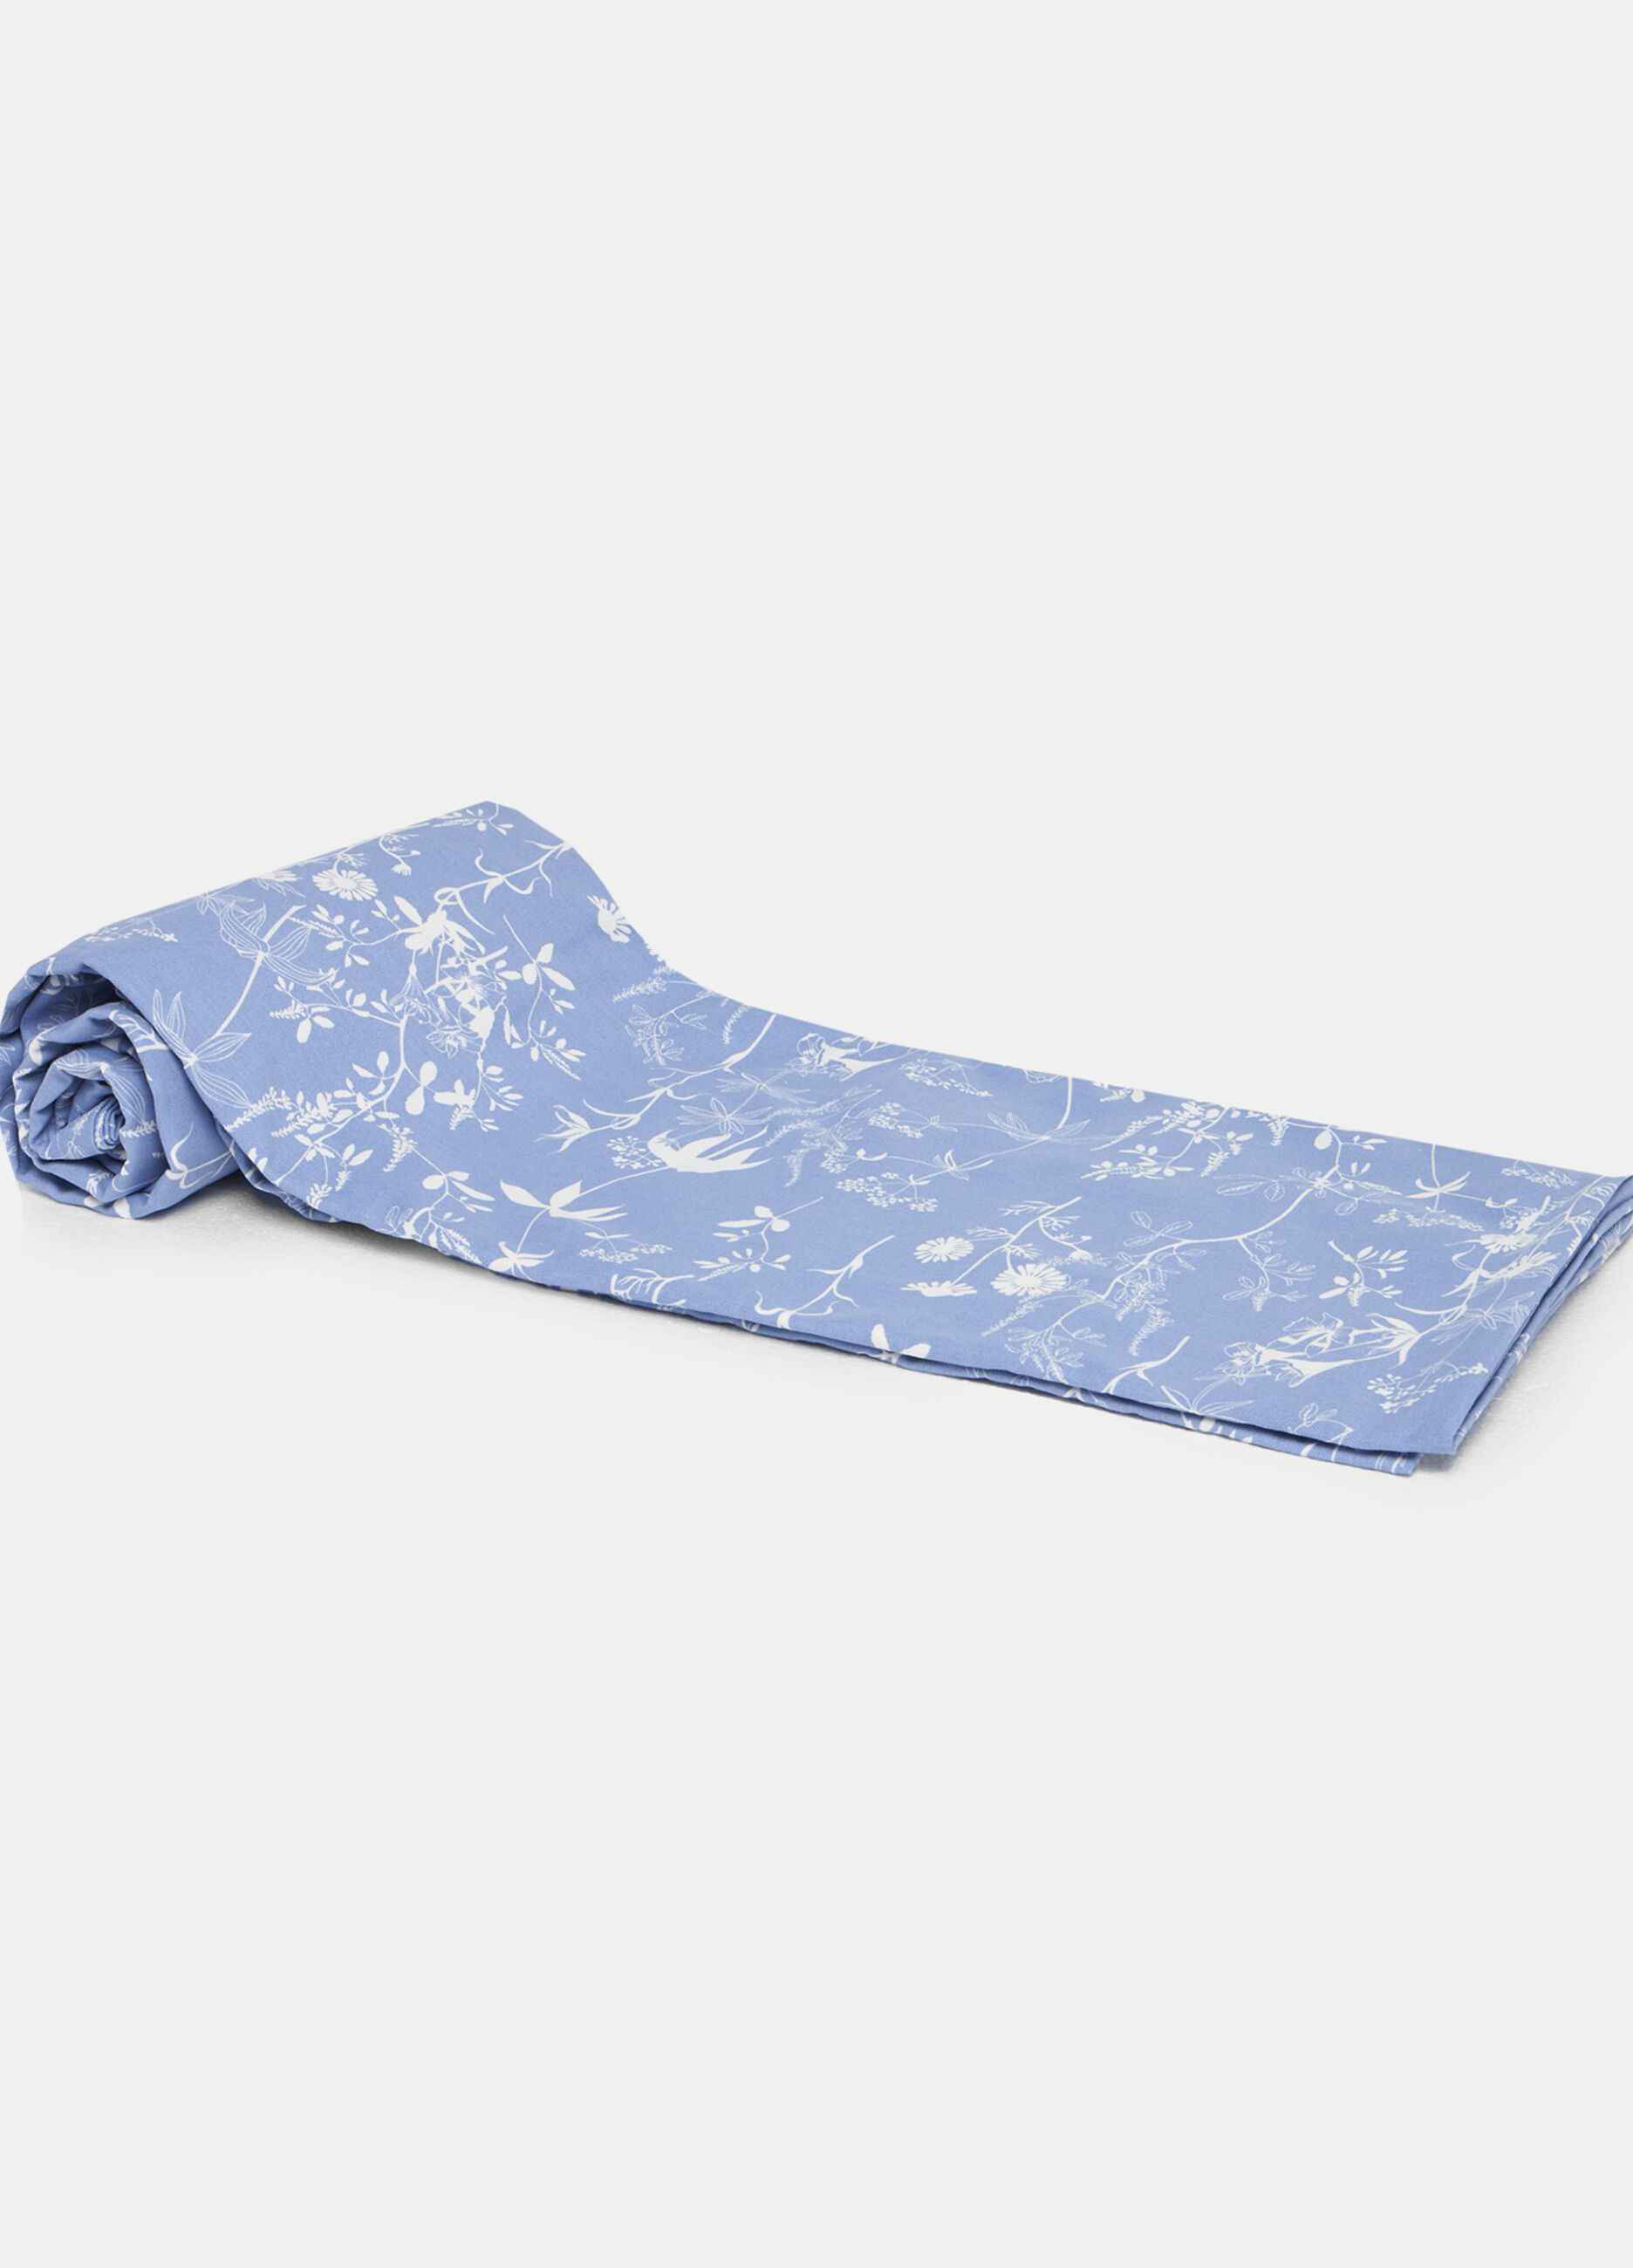 Cotton bath towel with all-over print